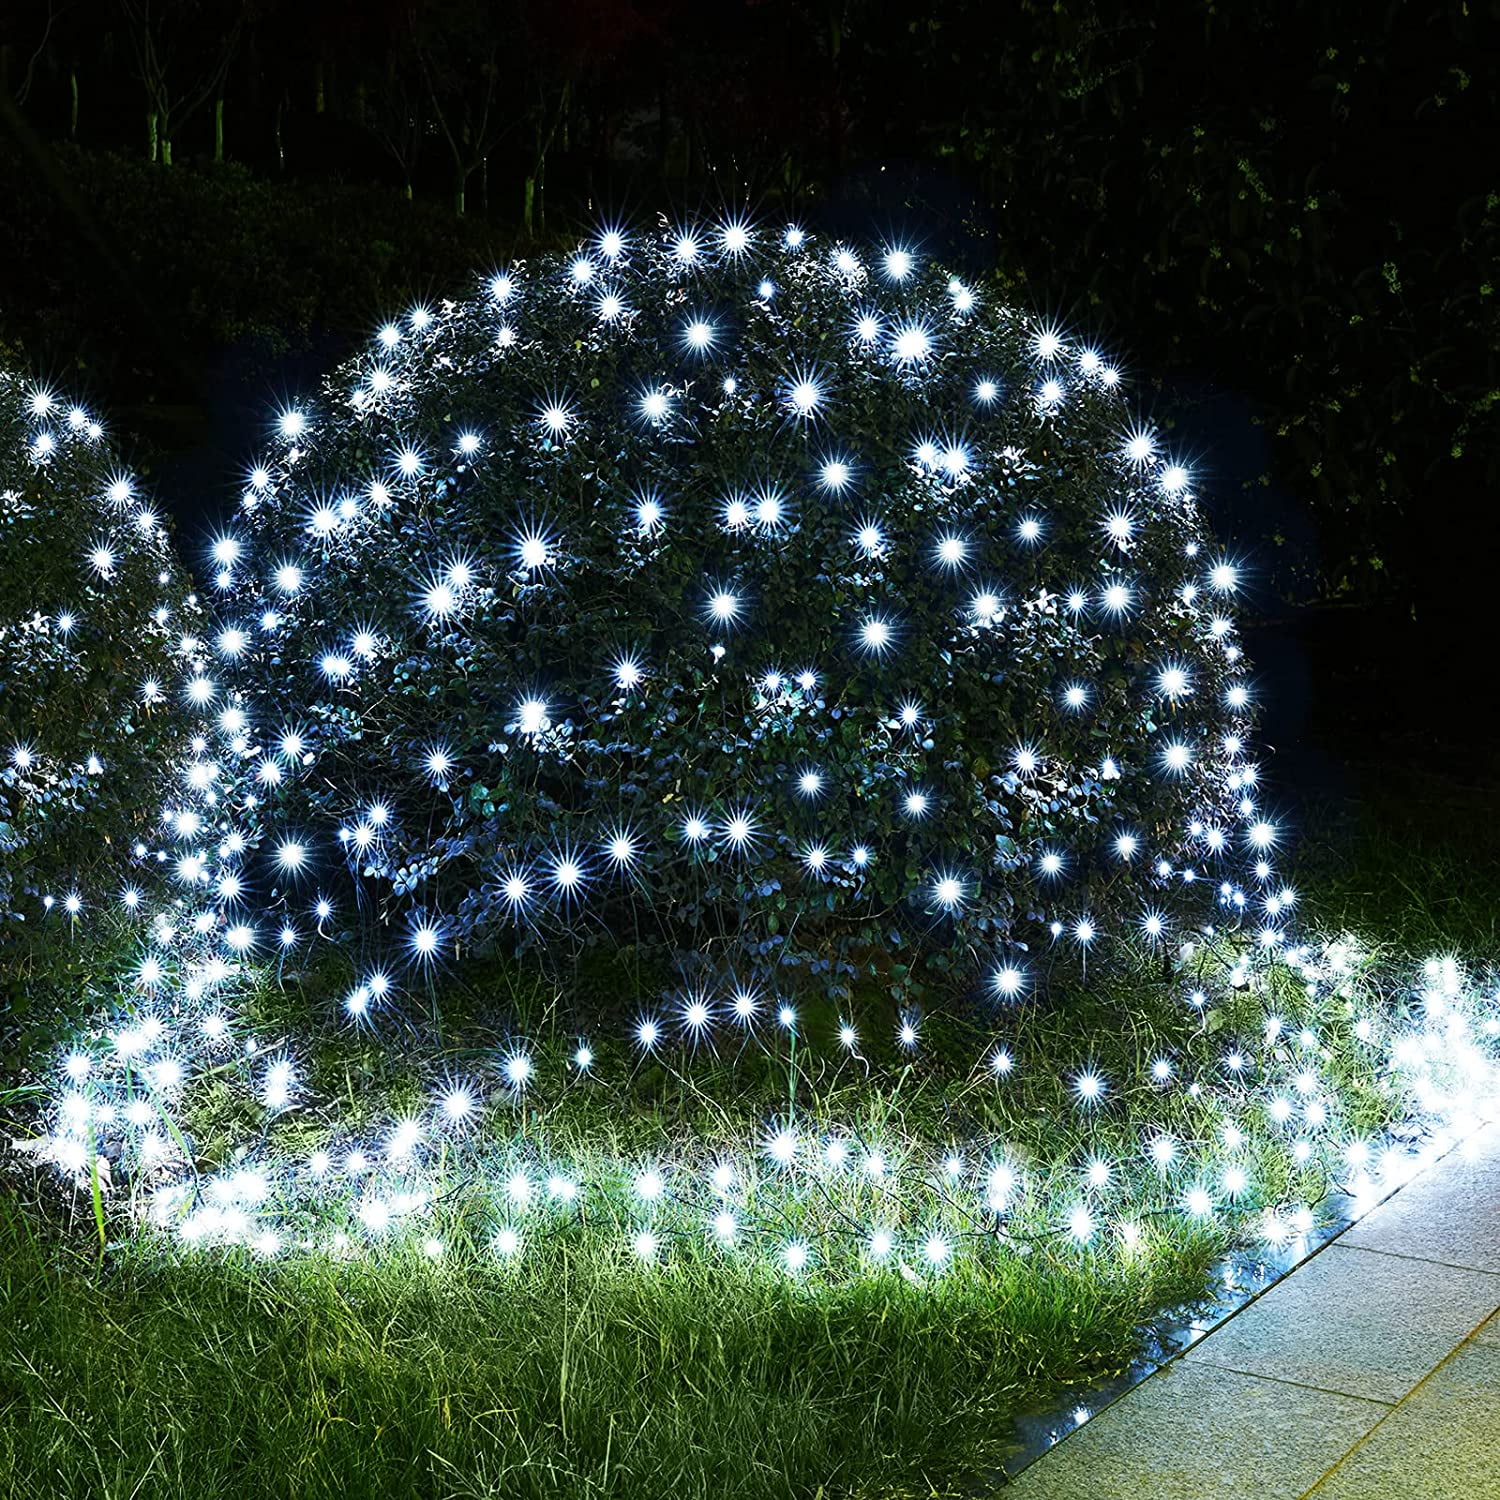 Christmas Mesh Net Lights, 5ft x 5ft 96 Led Outdoor Christmas Bush Lights  with Modes, Connectable, Waterproof Mesh Light for Trees, Bushes, Outdoor  Christmas Decorations